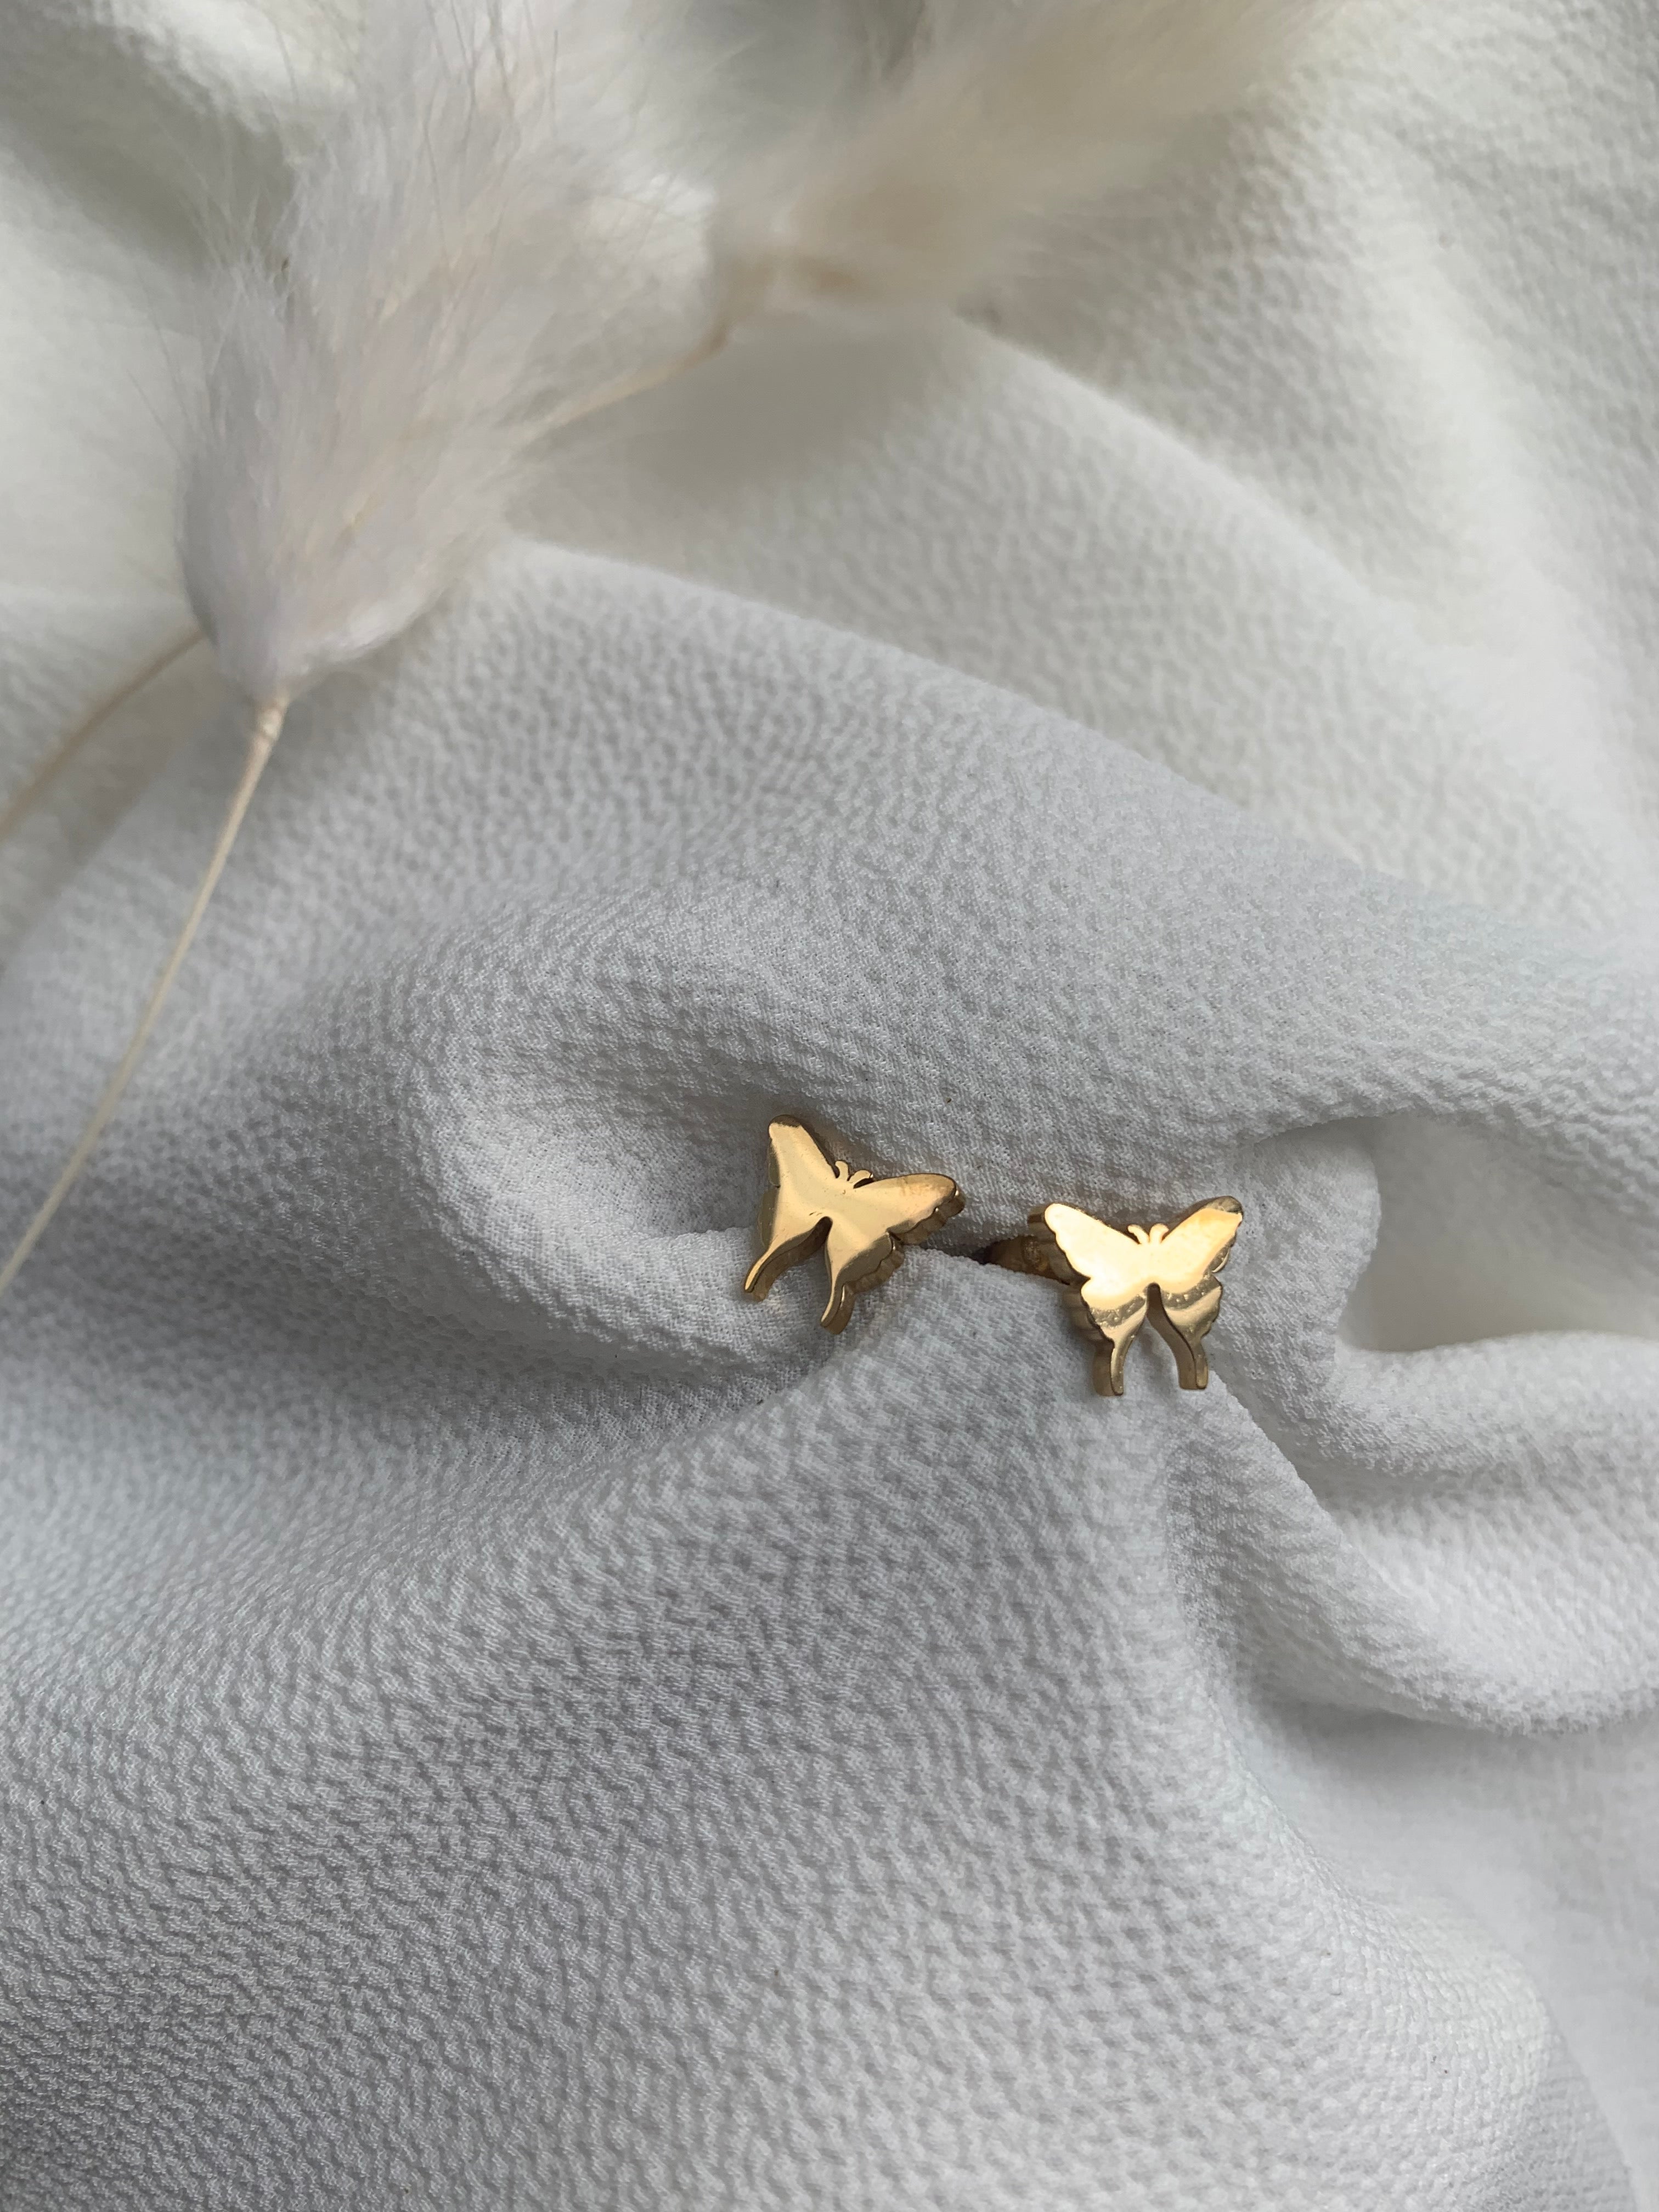 A cute butterfly or moon for everyday wear or to add to your second hole! 14 Karat Gold Plated Tarnish Resistant Hypoallergenic Choose between Butterly or Moon design |  Butterfly & Moon Studs | Handmade Jewelry EasyClubCo